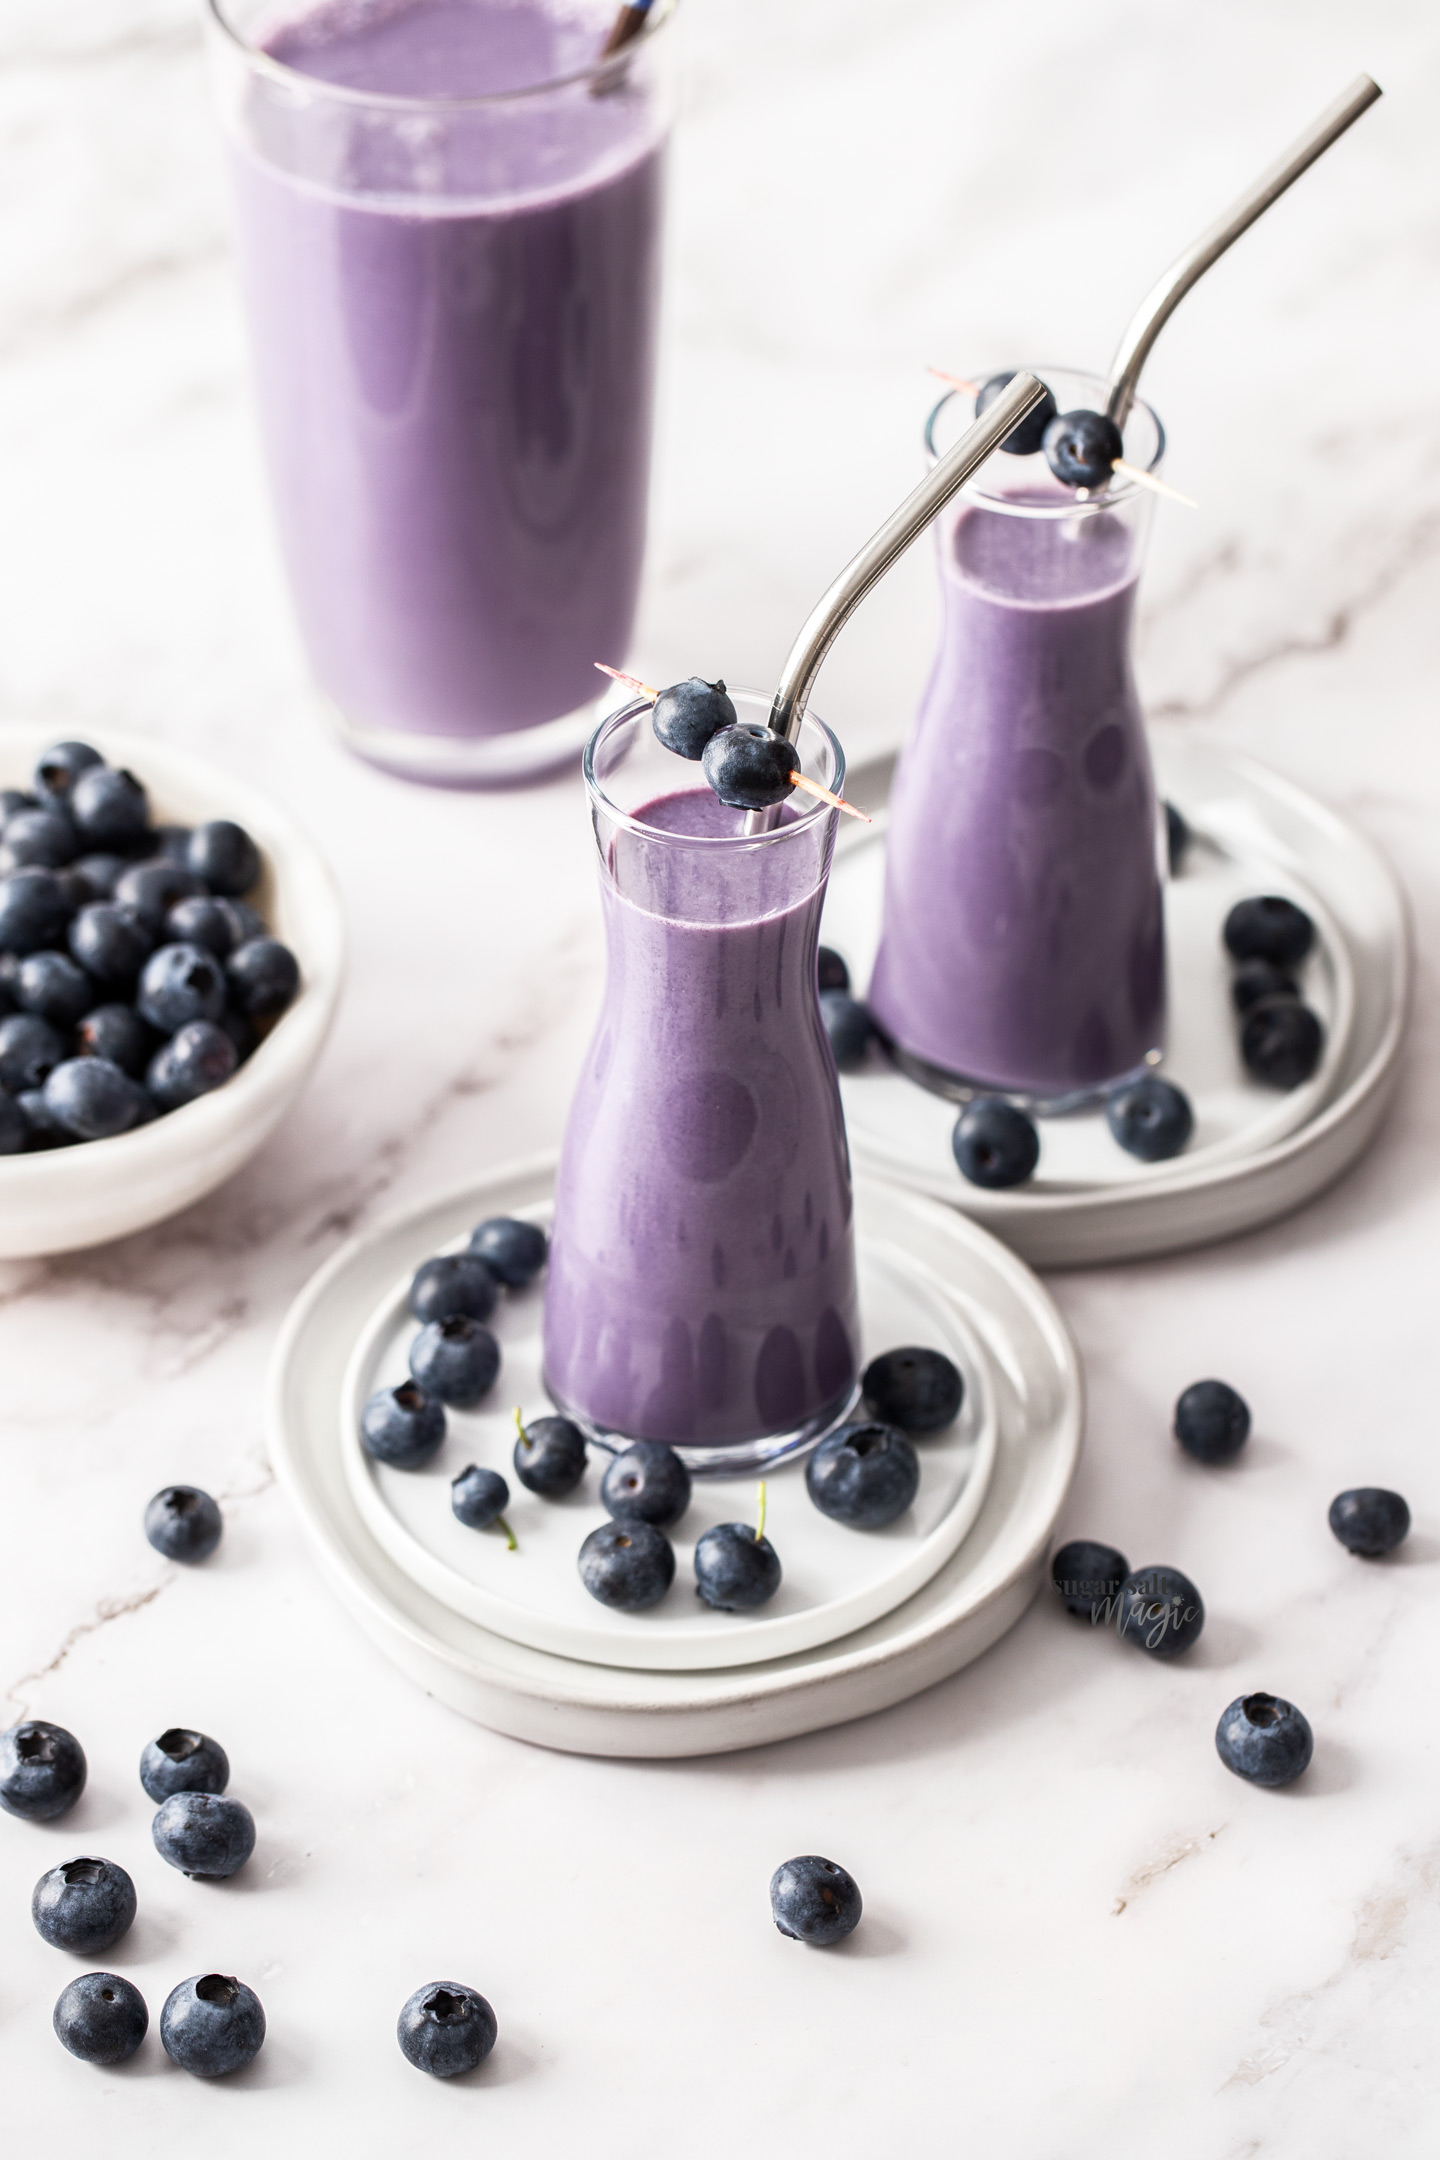 Two tall glasses filled with blueberry milk with a jug in the background.